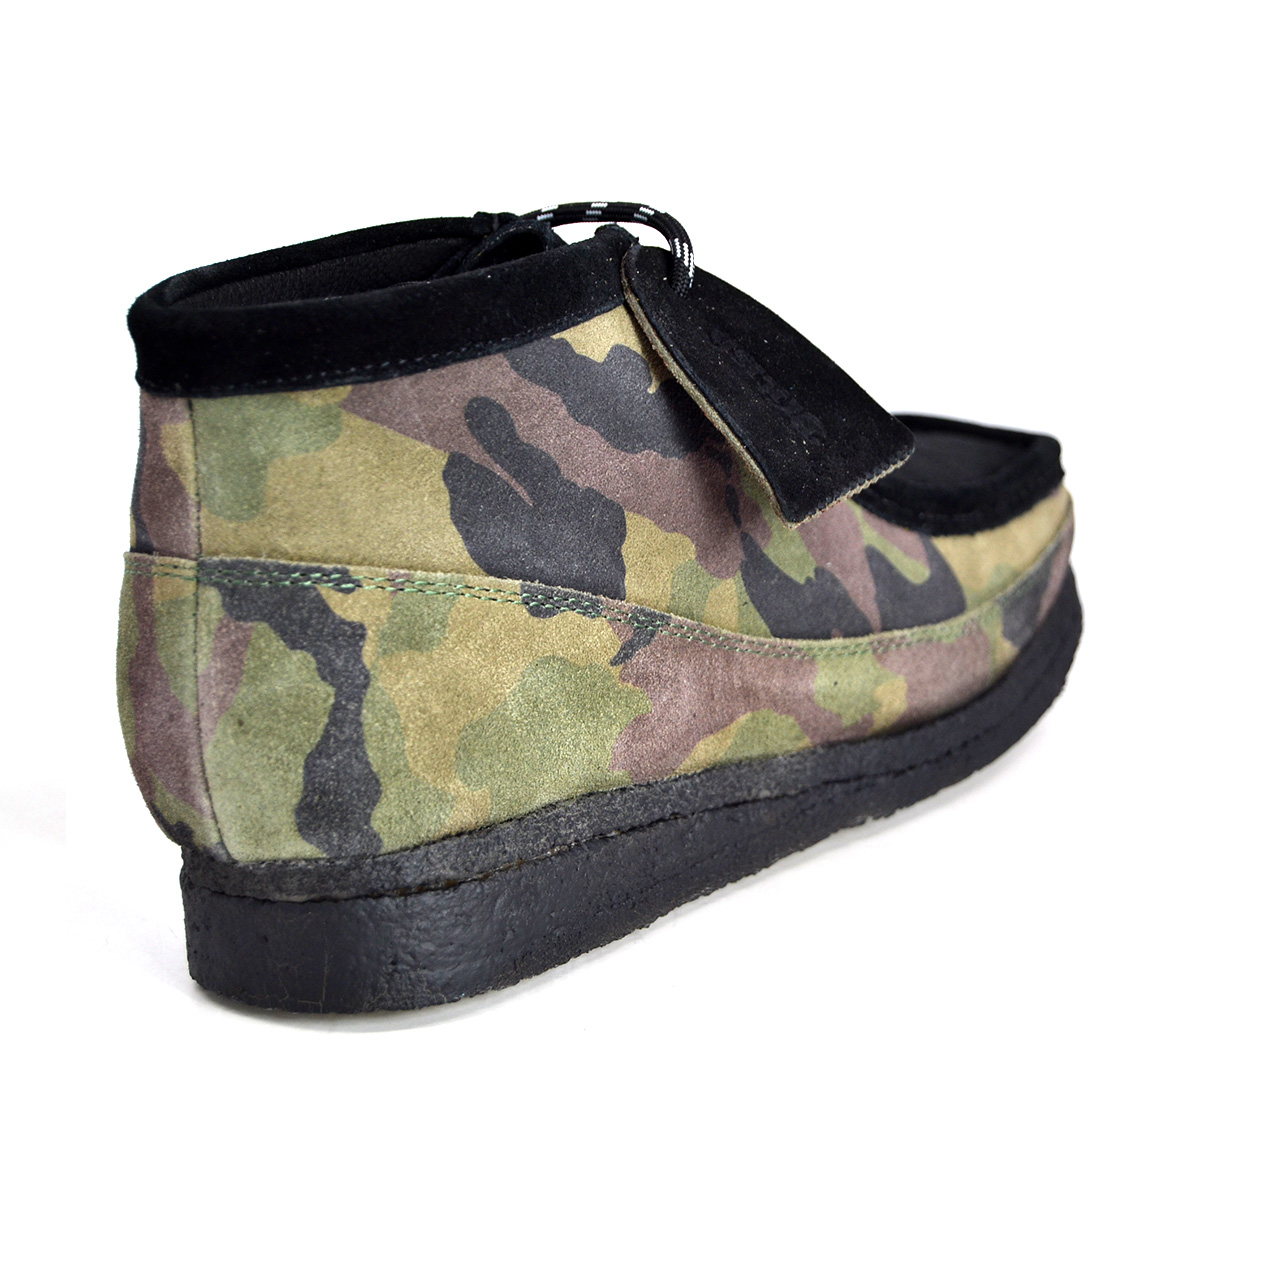 British Collection Walkers-Black Camouflage [100200-8] - $180.00 ...